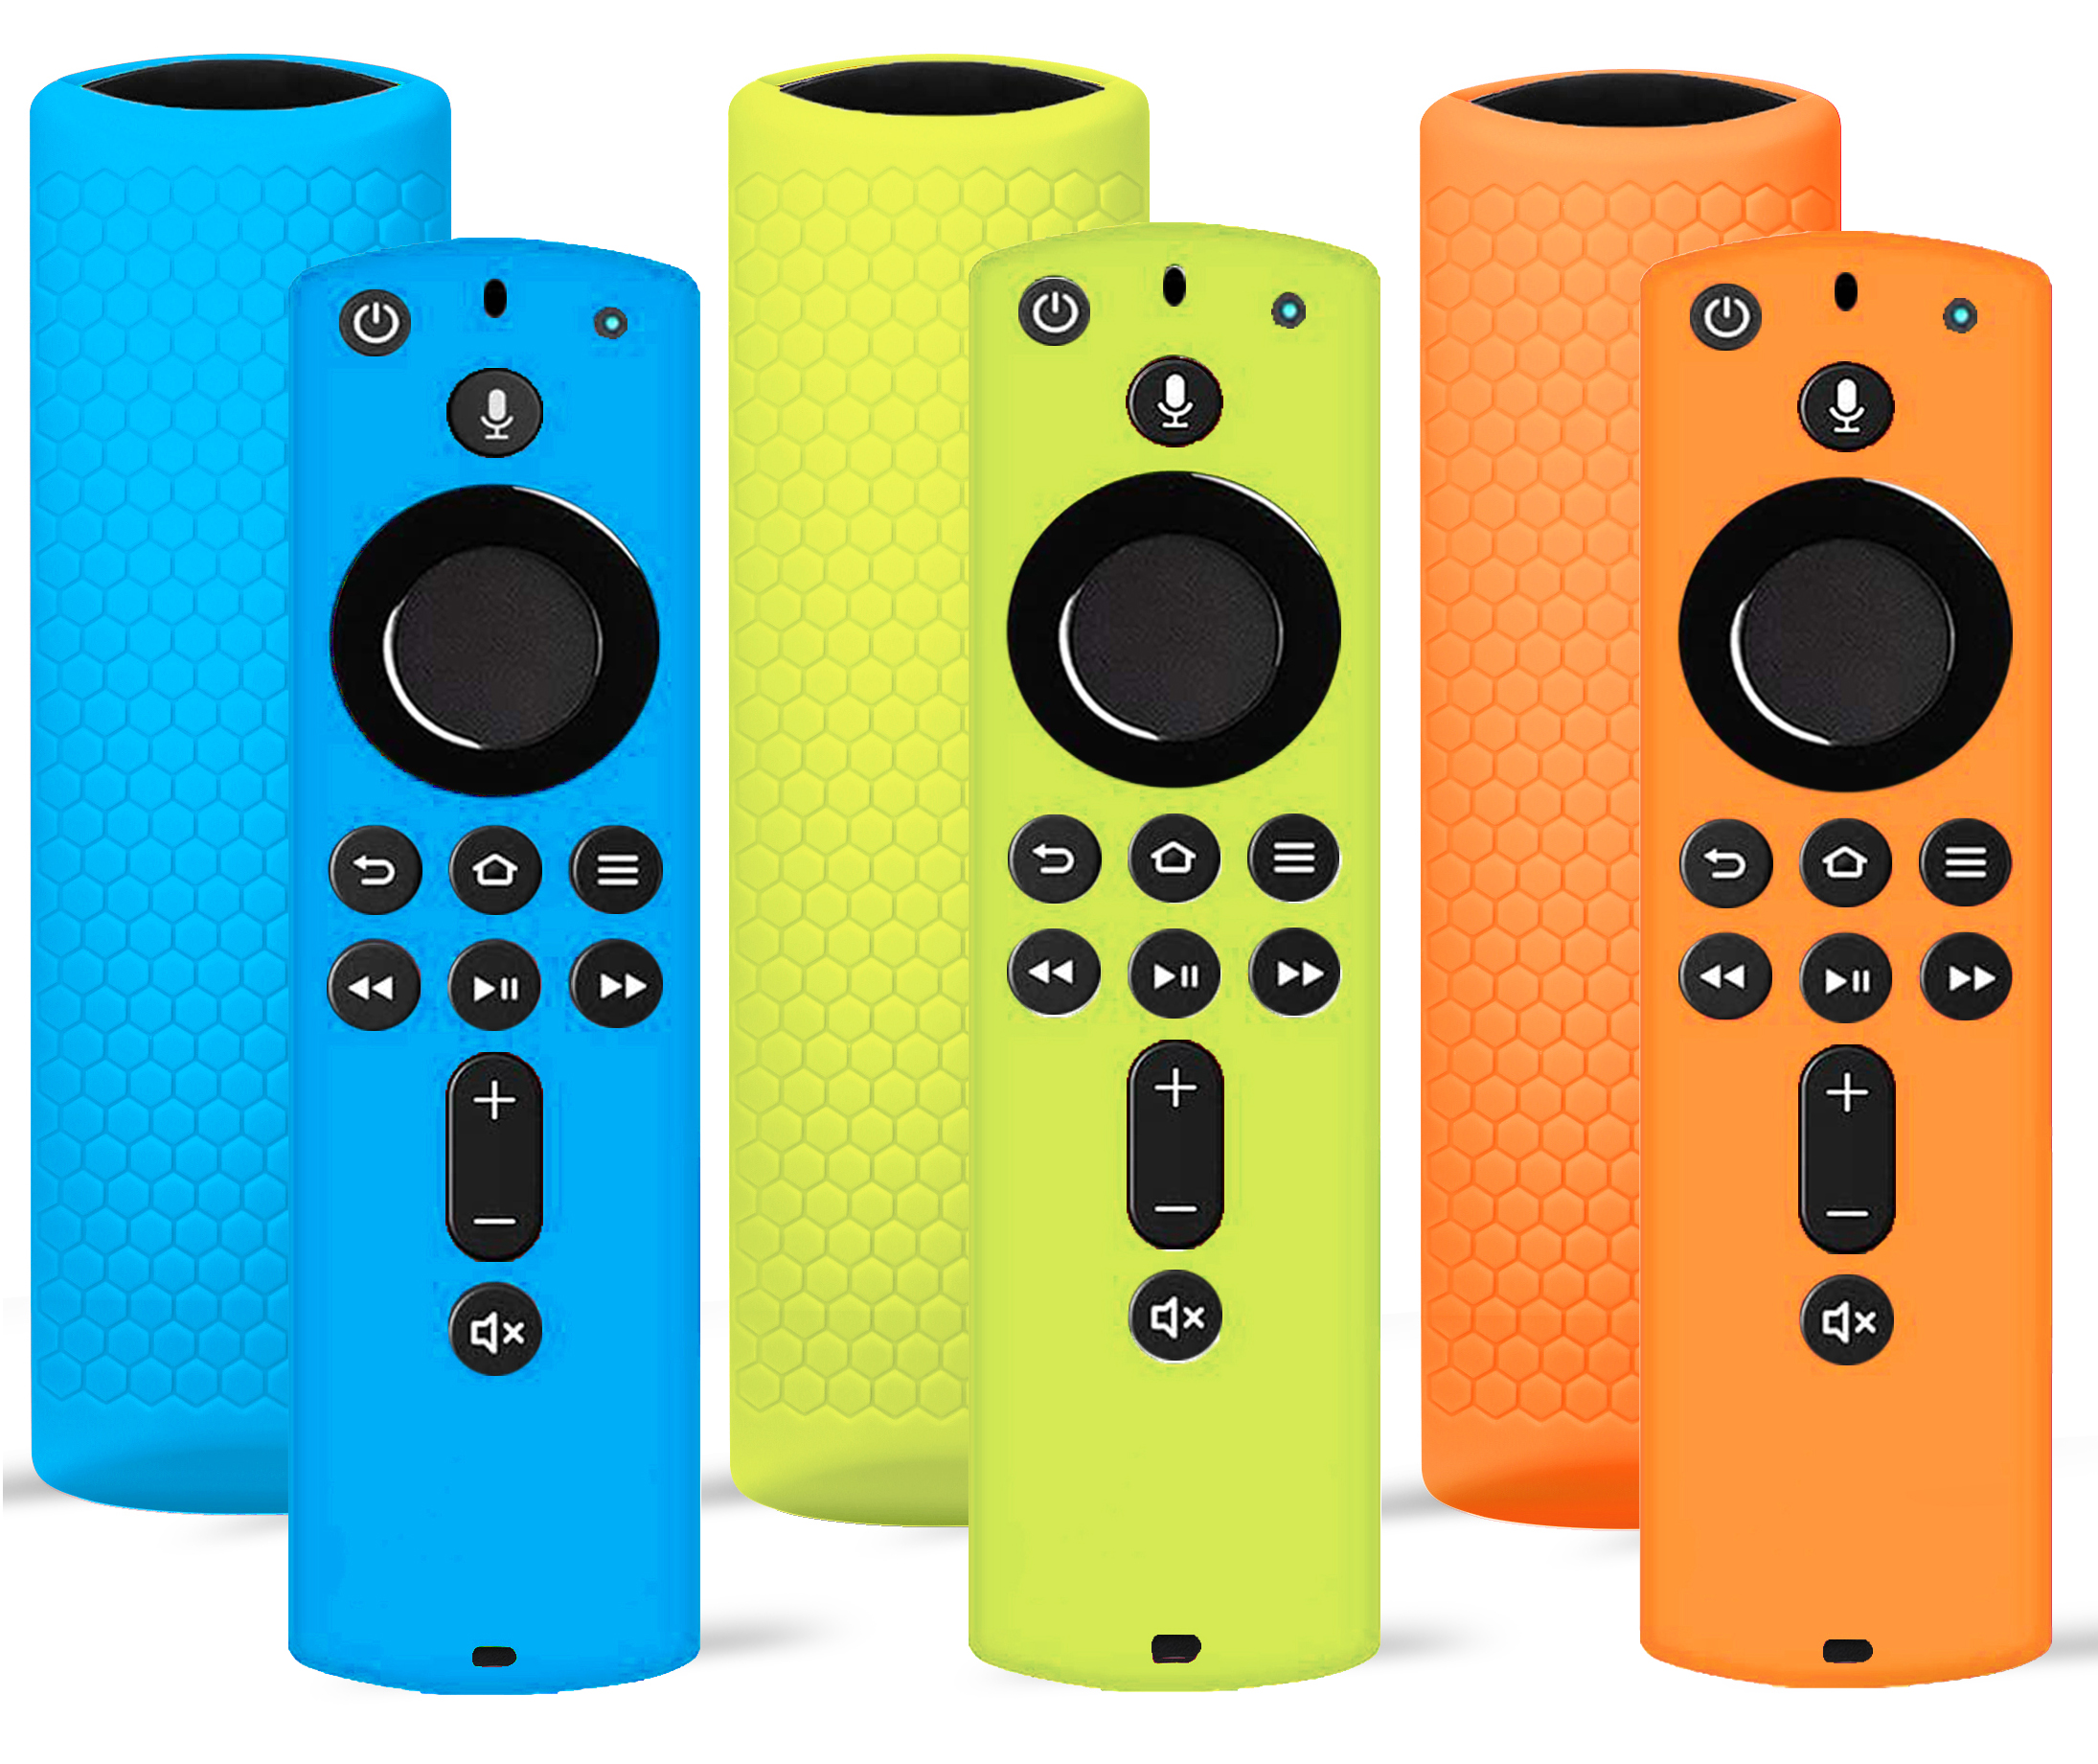 TOKERSE 3 Pack Remote Case Cover for Alexa Voice Remote for Amazon Fire TV Stick 2020/ Fire TV Stick 4K/ Fire TV Cube/Fire TV (3rd Gen) - Silicone Cover Case Compatible with All-New 2nd Gen Remote Control - Blue Green Orange